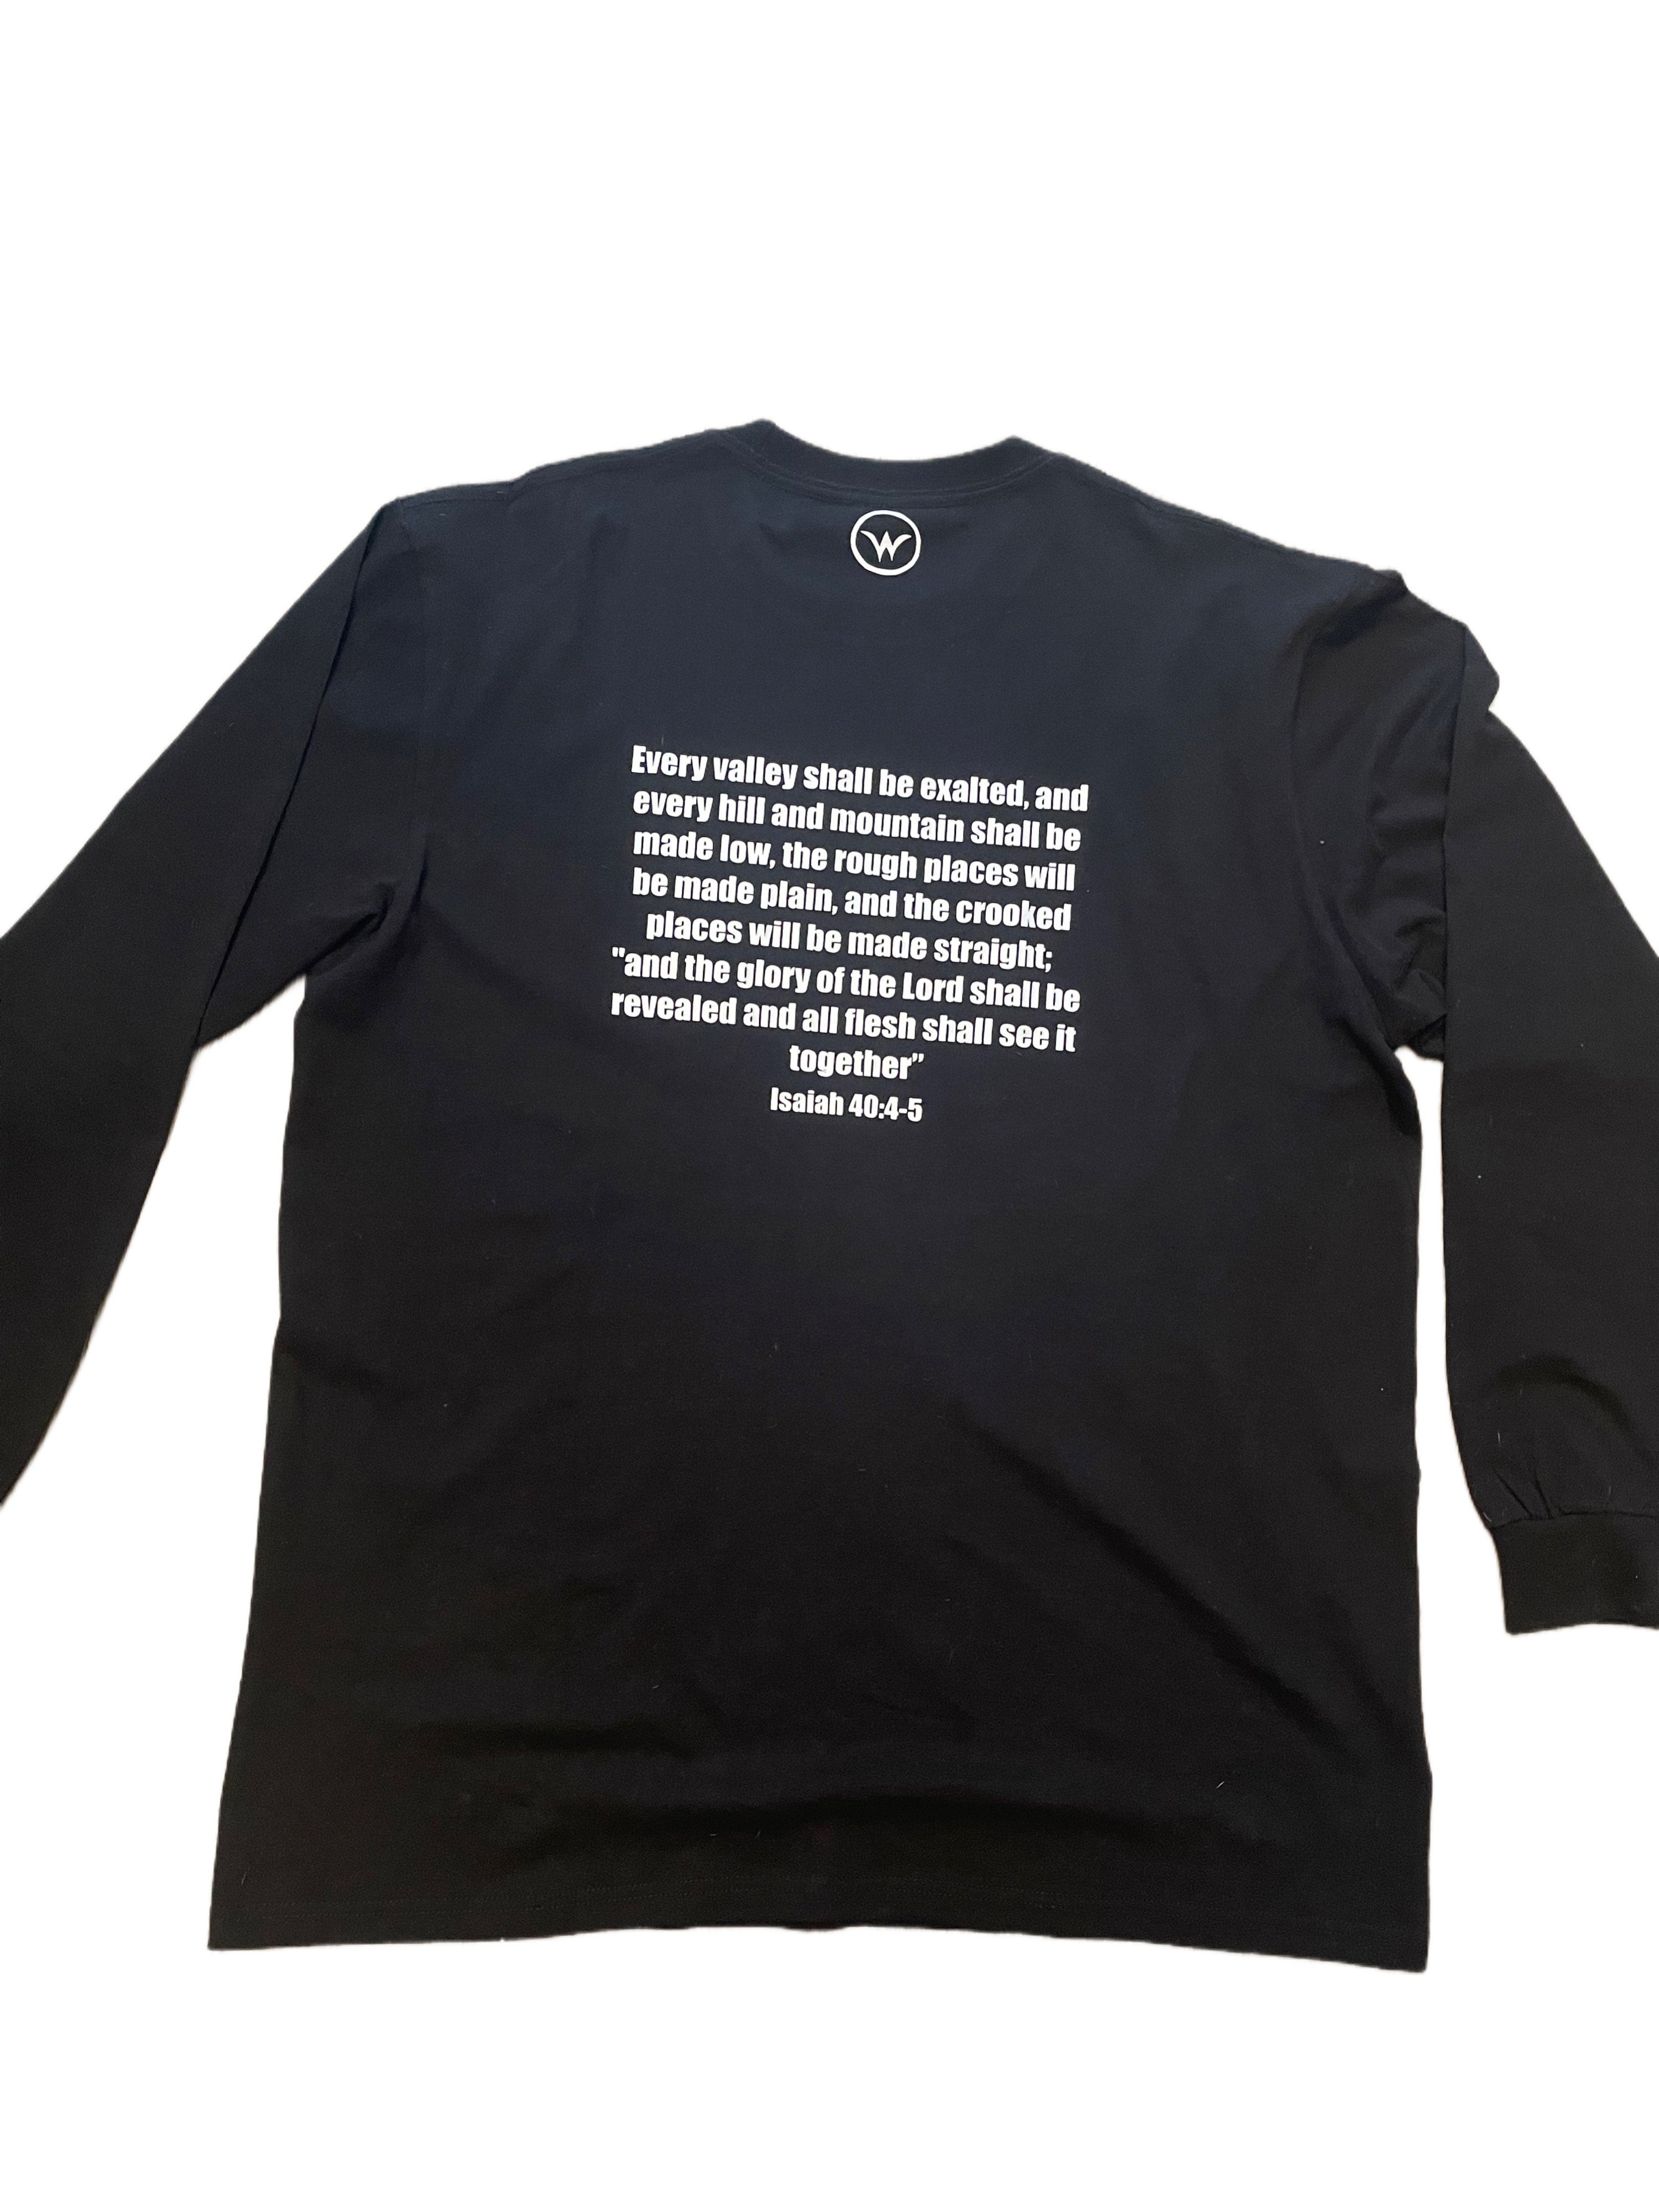 LIMITED EDITION "I HAVE A DREAM" Long Sleeve-BLK/White